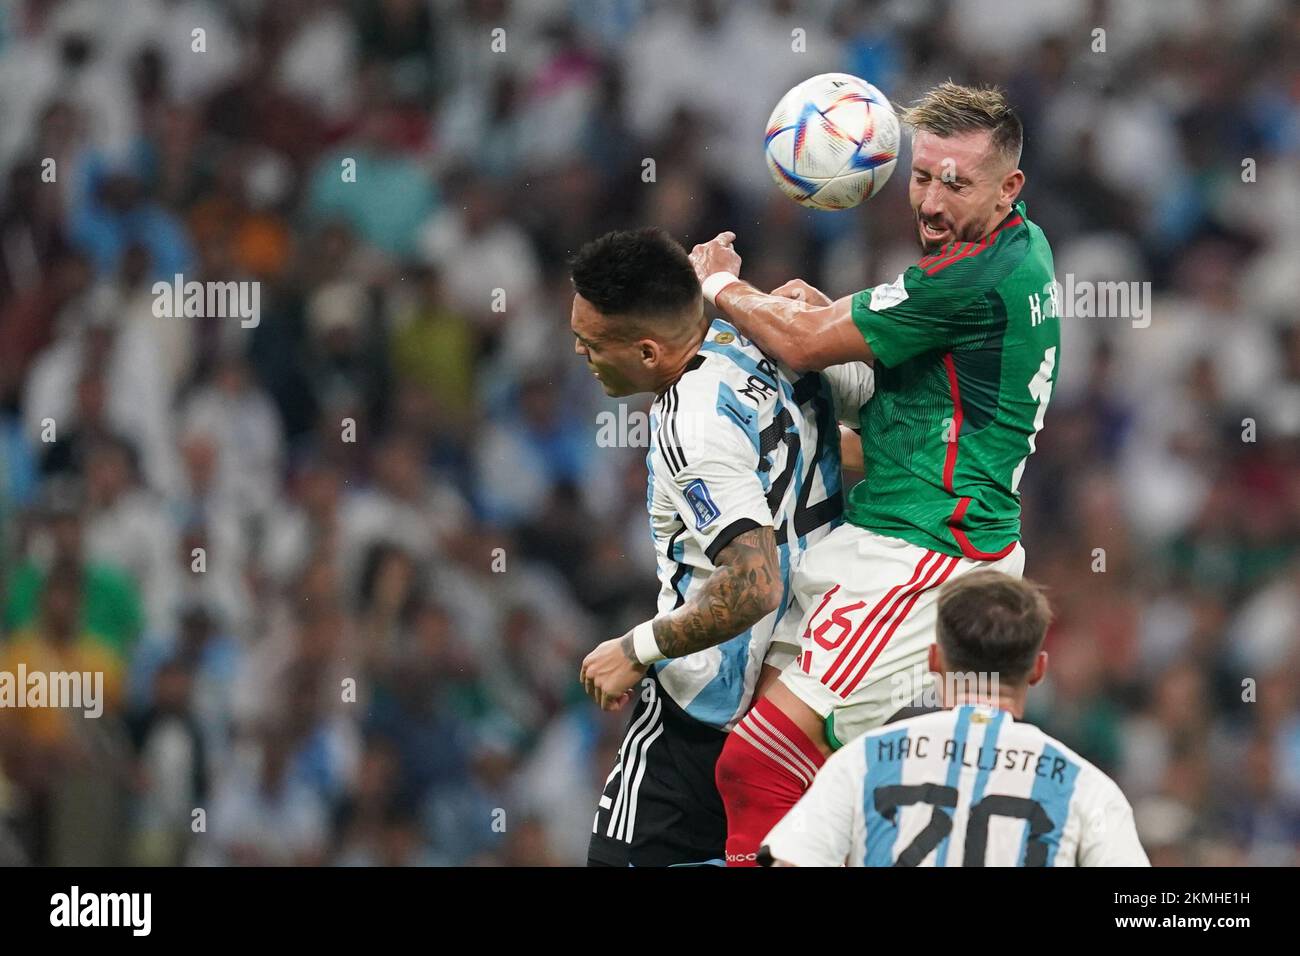 LUSAIL, QATAR - NOVEMBER 26: Player of Argentina Lautaro Martínez fights for the ball with player of Mexico Héctor Herrera during the FIFA World Cup Qatar 2022 group A match between Argentina and Mexico at Khalifa International Stadium on November 26, 2022 in Doha, Qatar. (Photo by Florencia Tan Jun/PxImages) Stock Photo